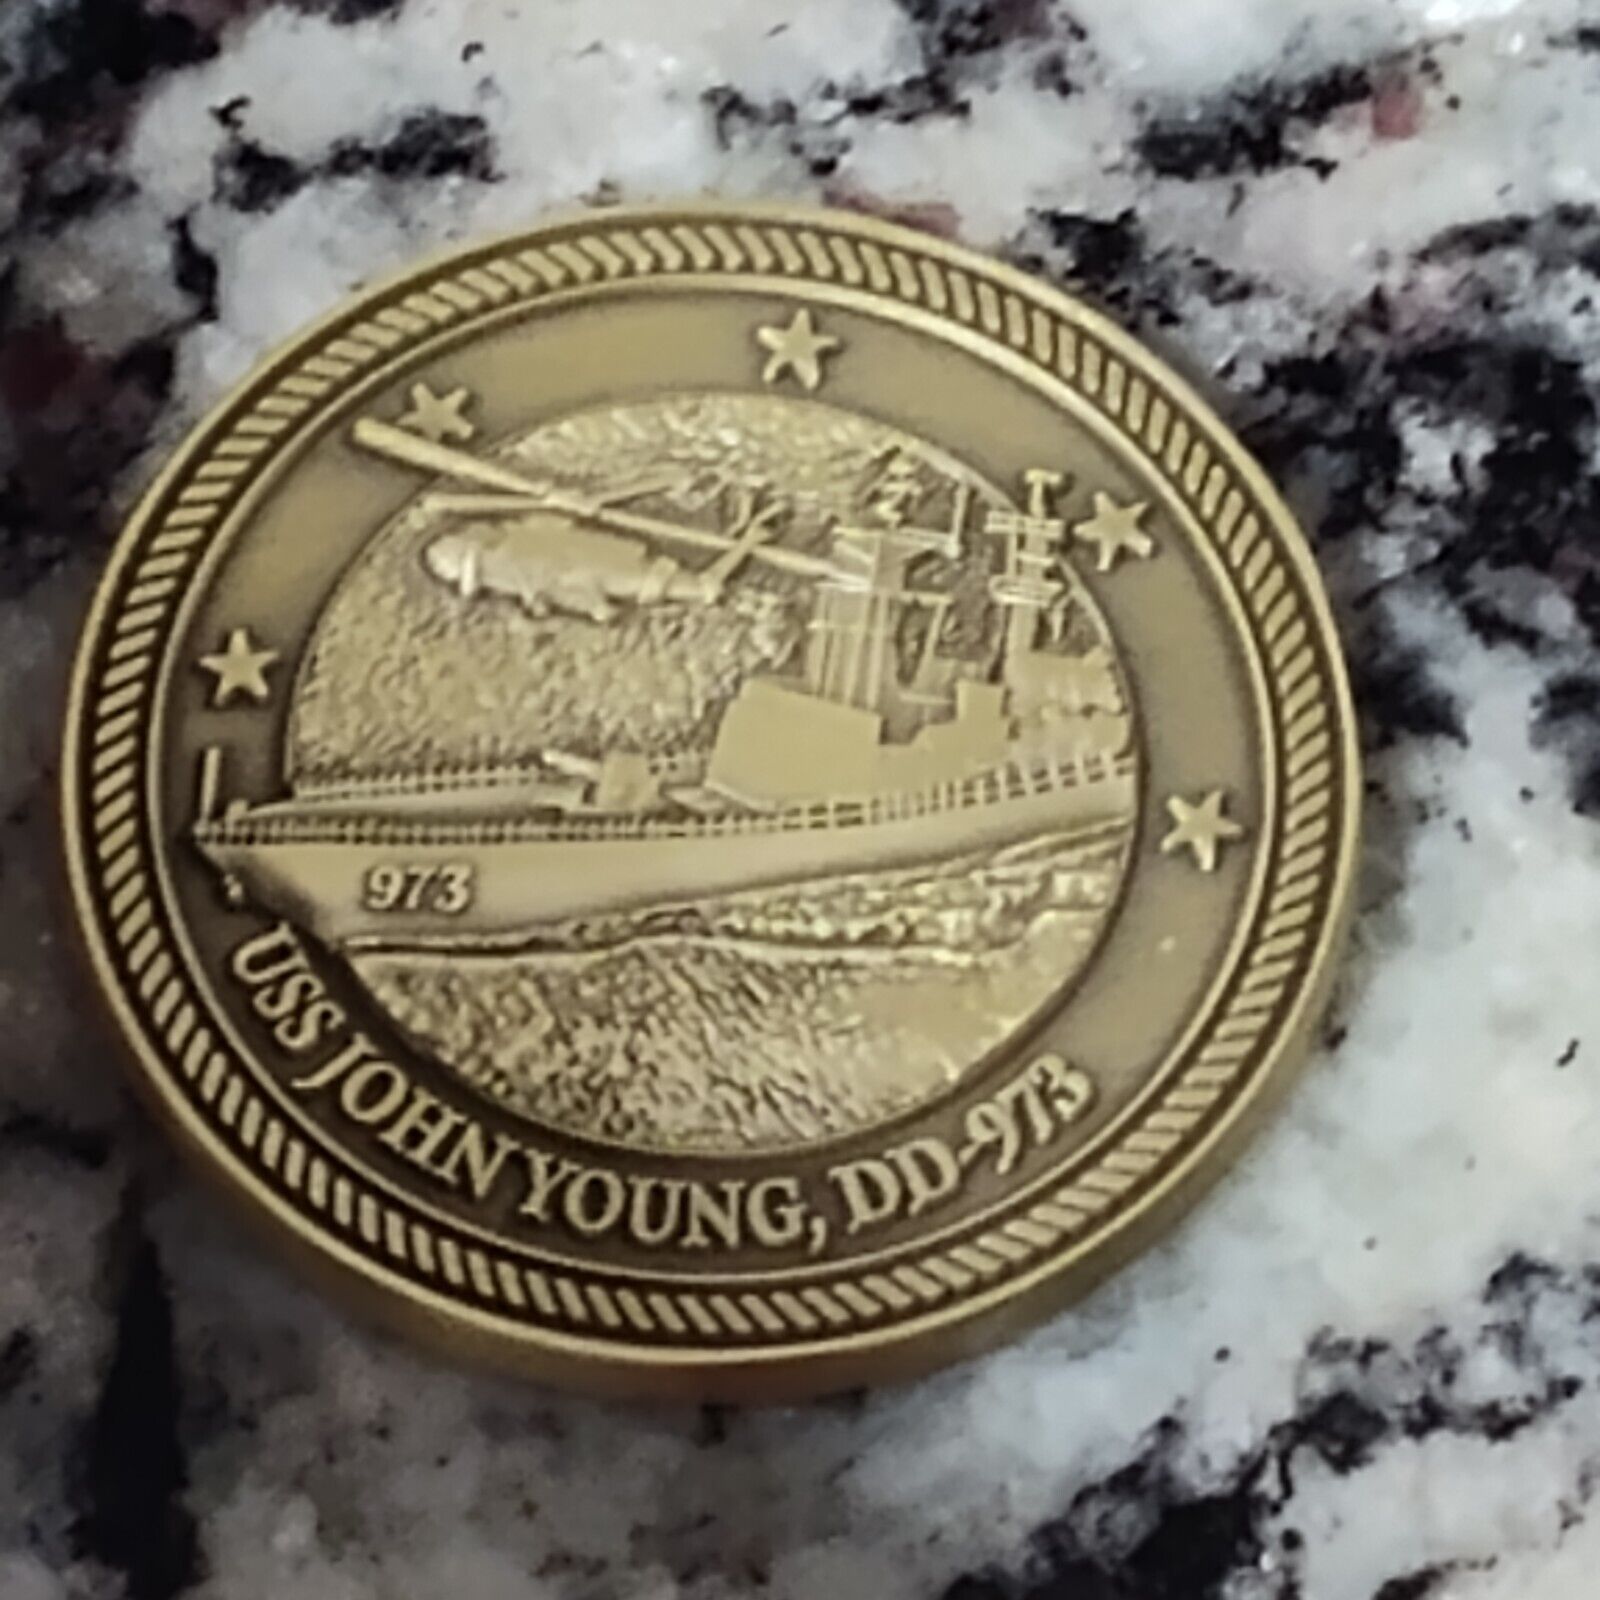 USS JOHN YOUNG, DD-973 Challenge Coin